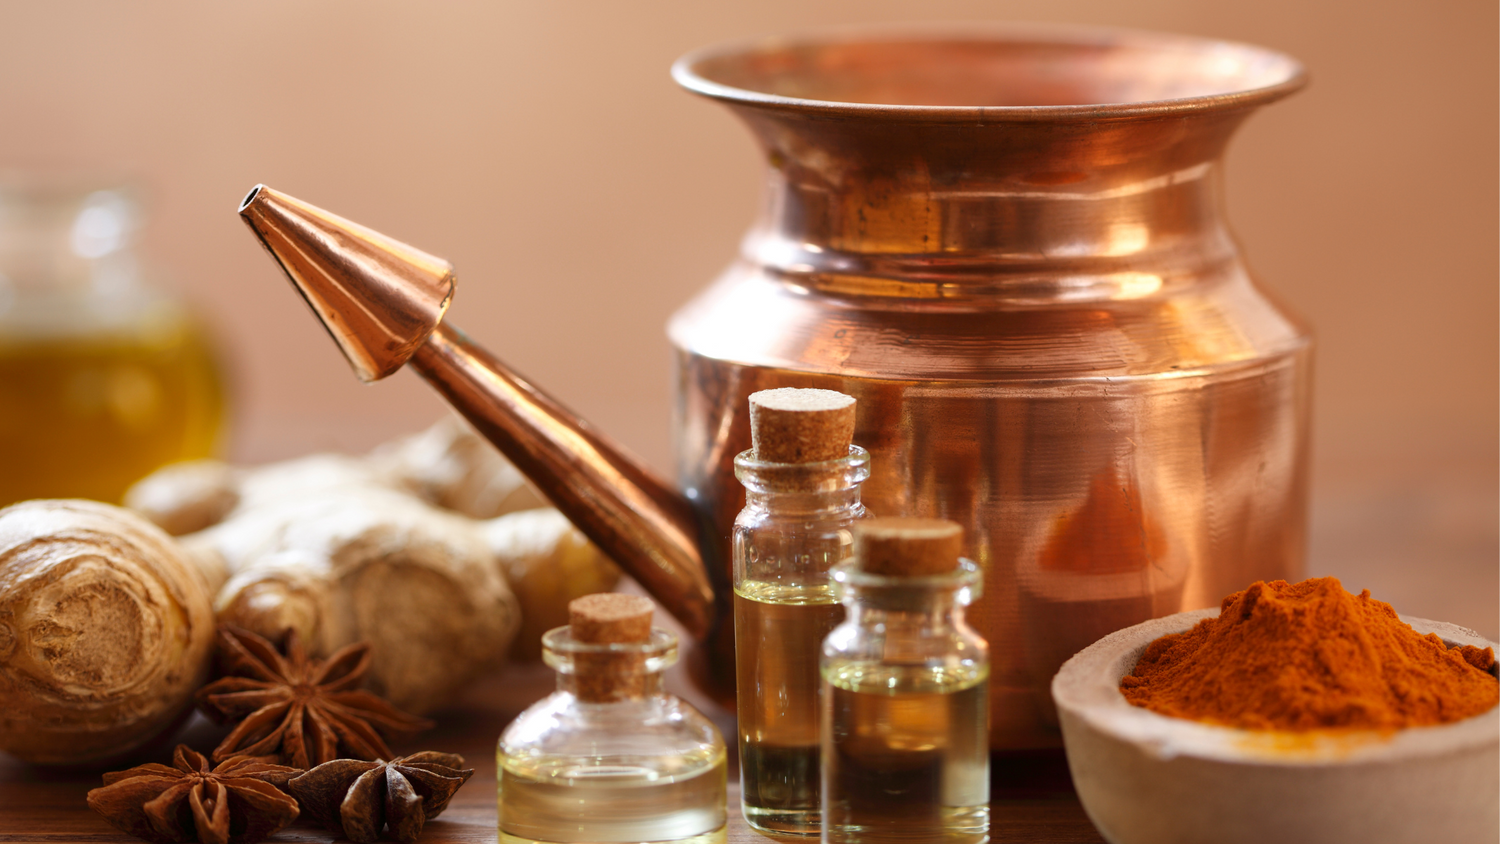 Nurturing Wellness: The sacred role of Water in Ayurvedic Living